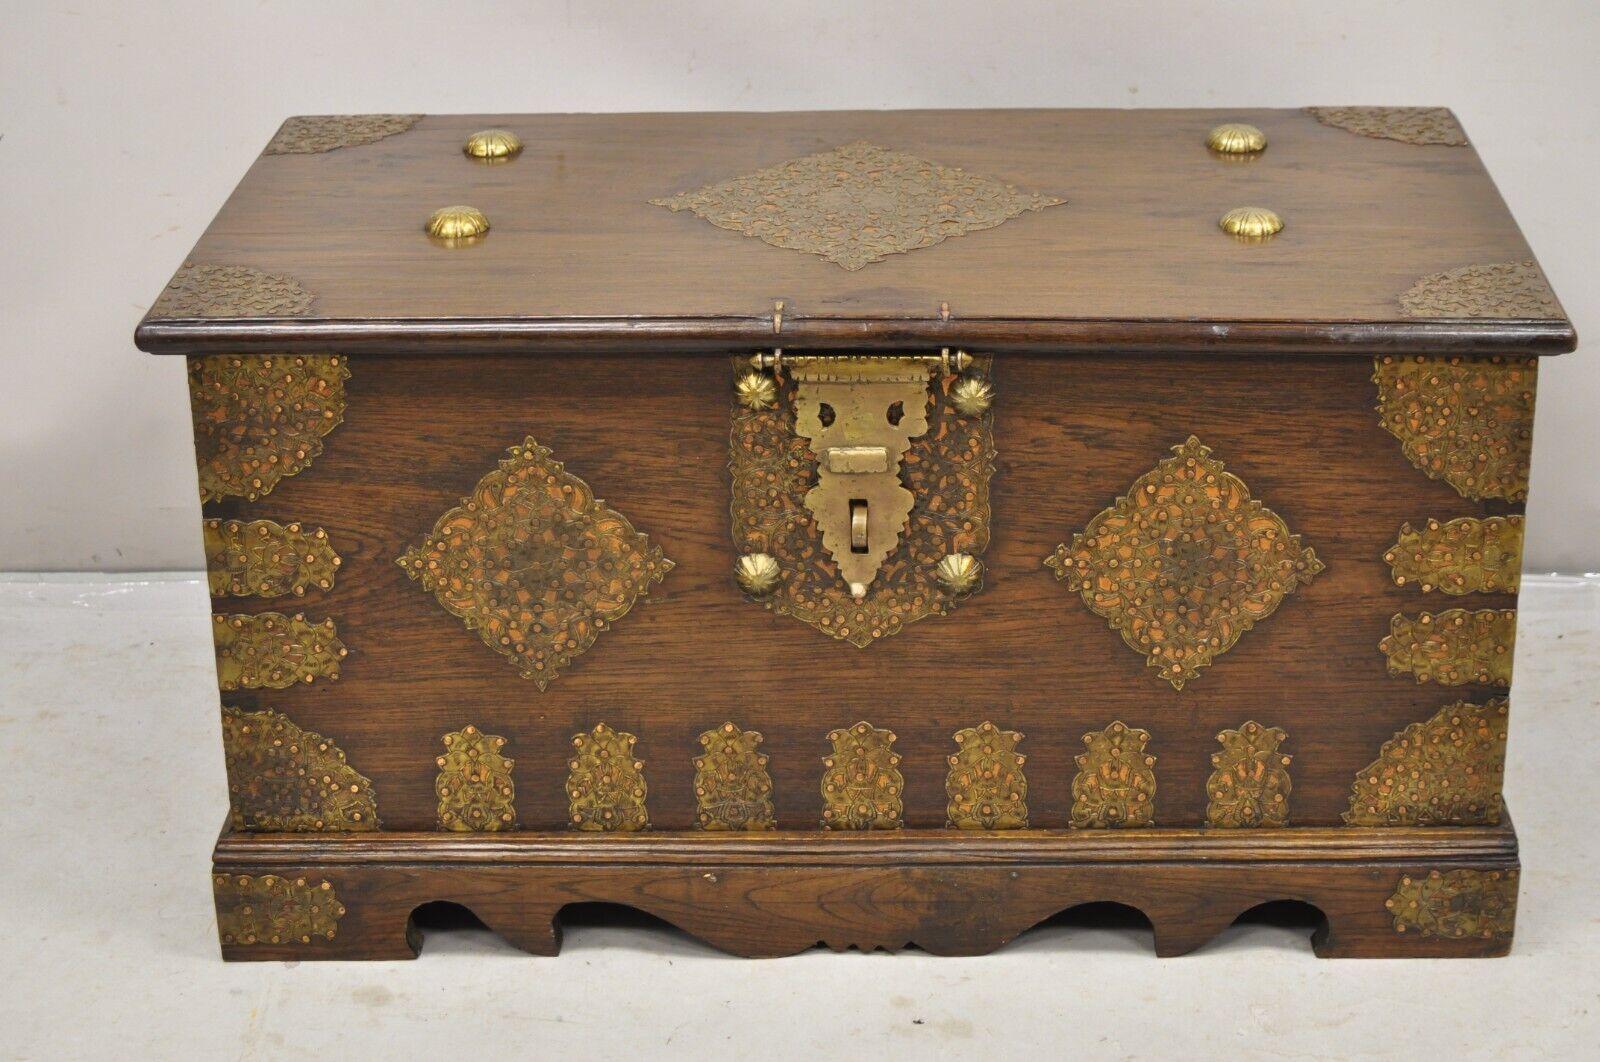 Antique Oak (possibly walnut) Wood & Brass Mounted Syrian Coffer Blanket Chest Trunk. Item features solid wood construction, beautiful wood grain, copper and brass decorative mounts, heavy solid brass hardware, very nice antique chest. Circa 190